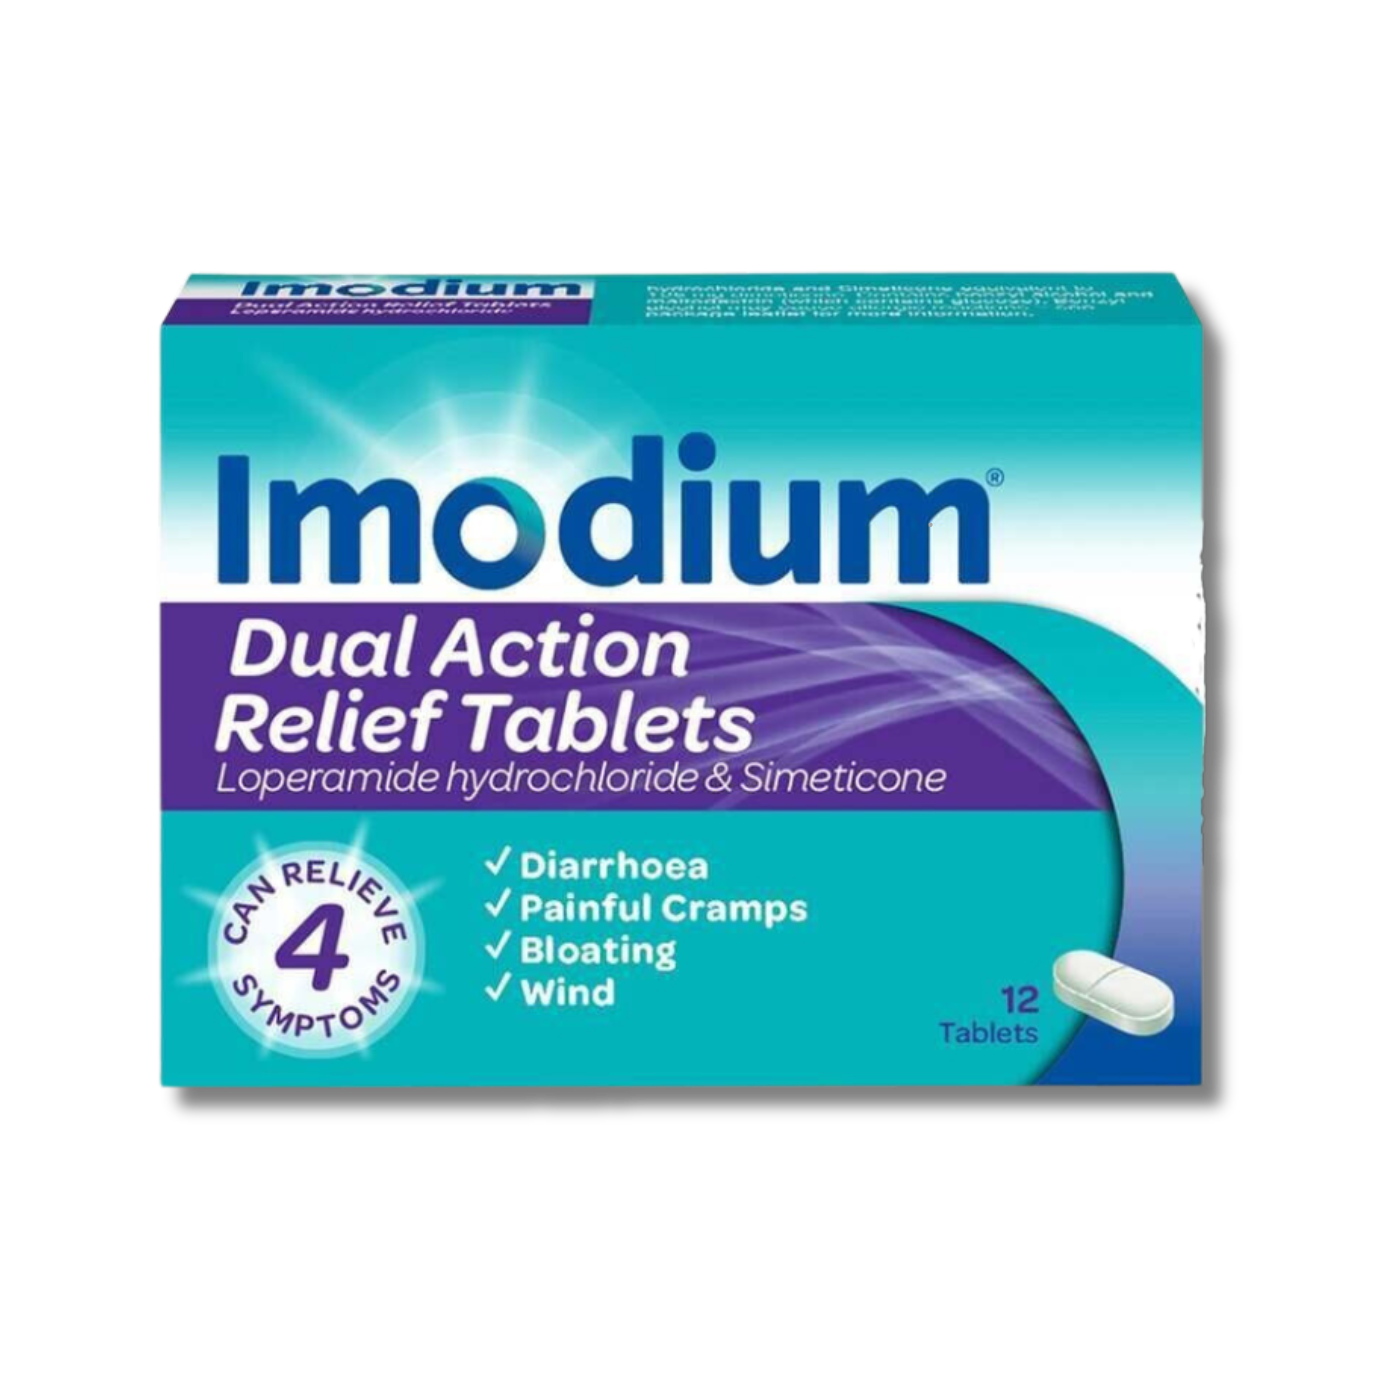 Imodium Dual Action Relief Tablets - 12 Tablets